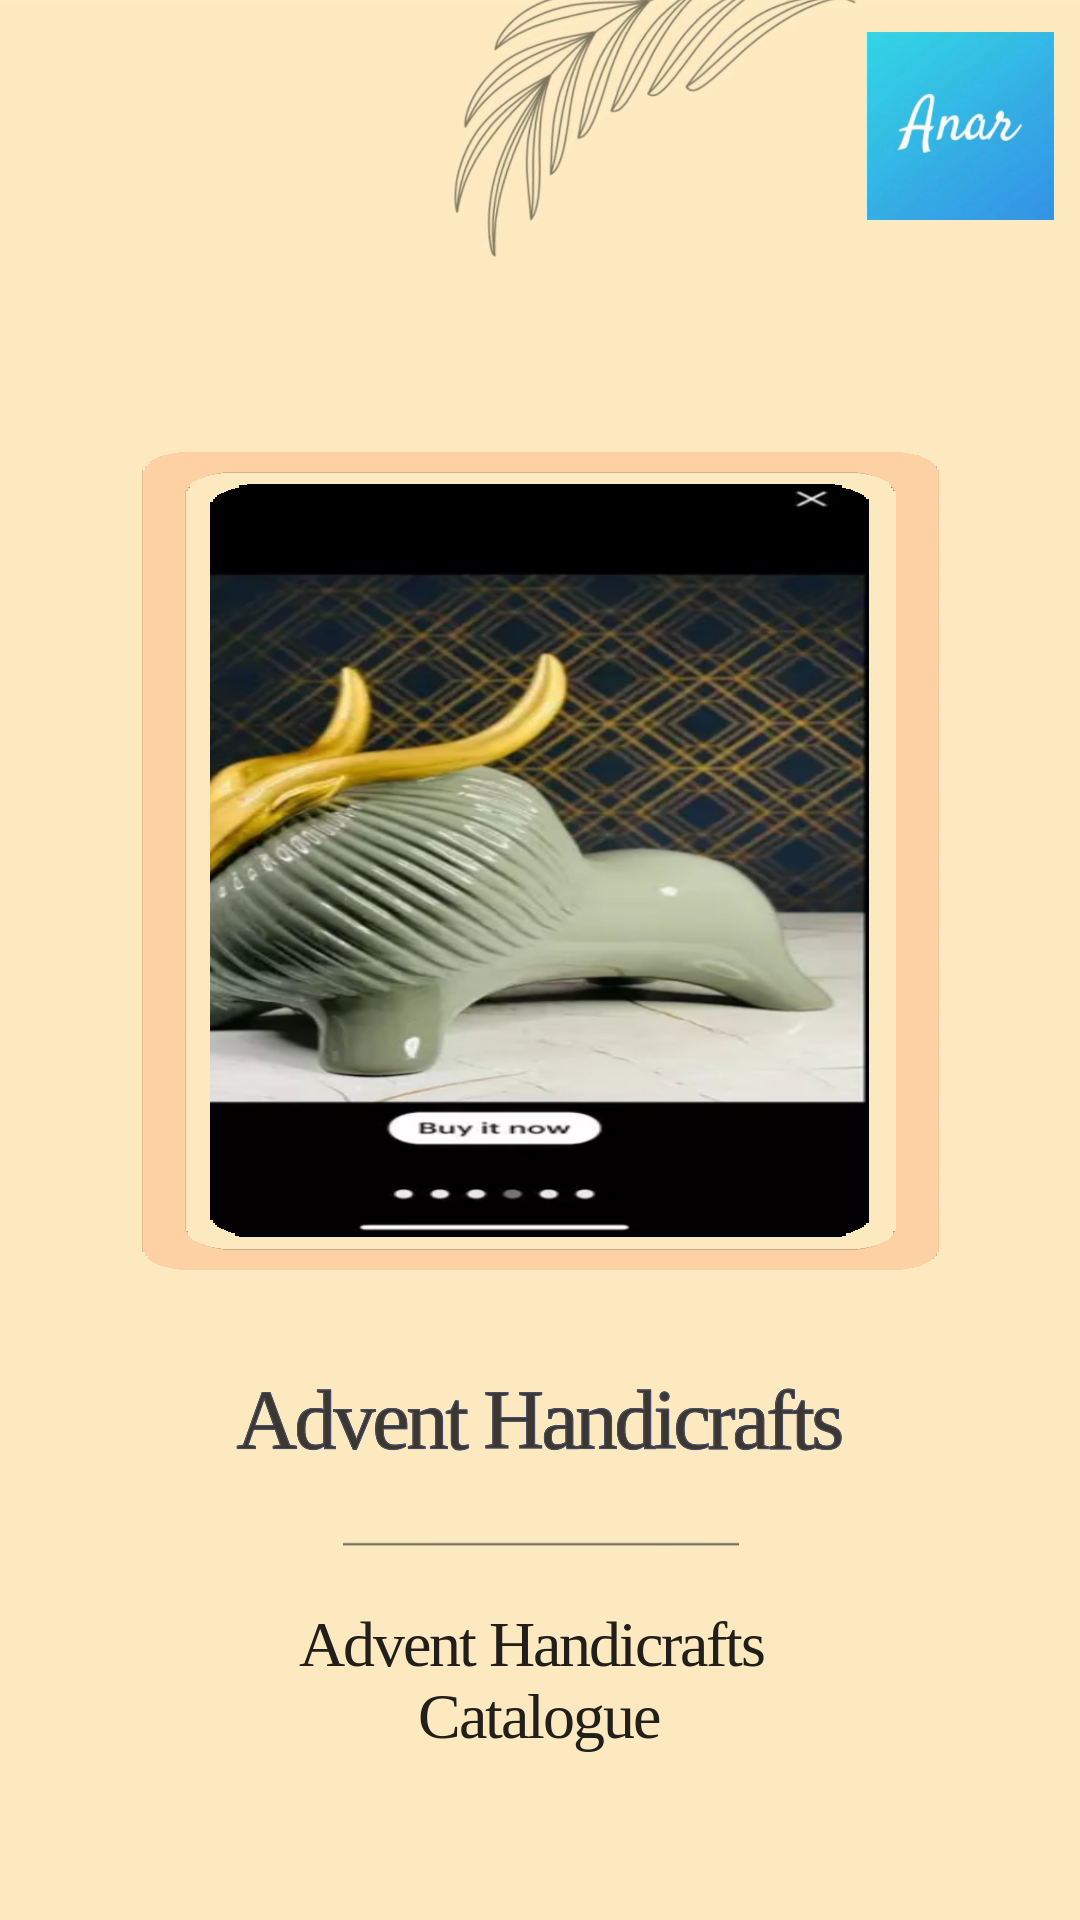 Thumbnail of video titled Advent Handicrafts 